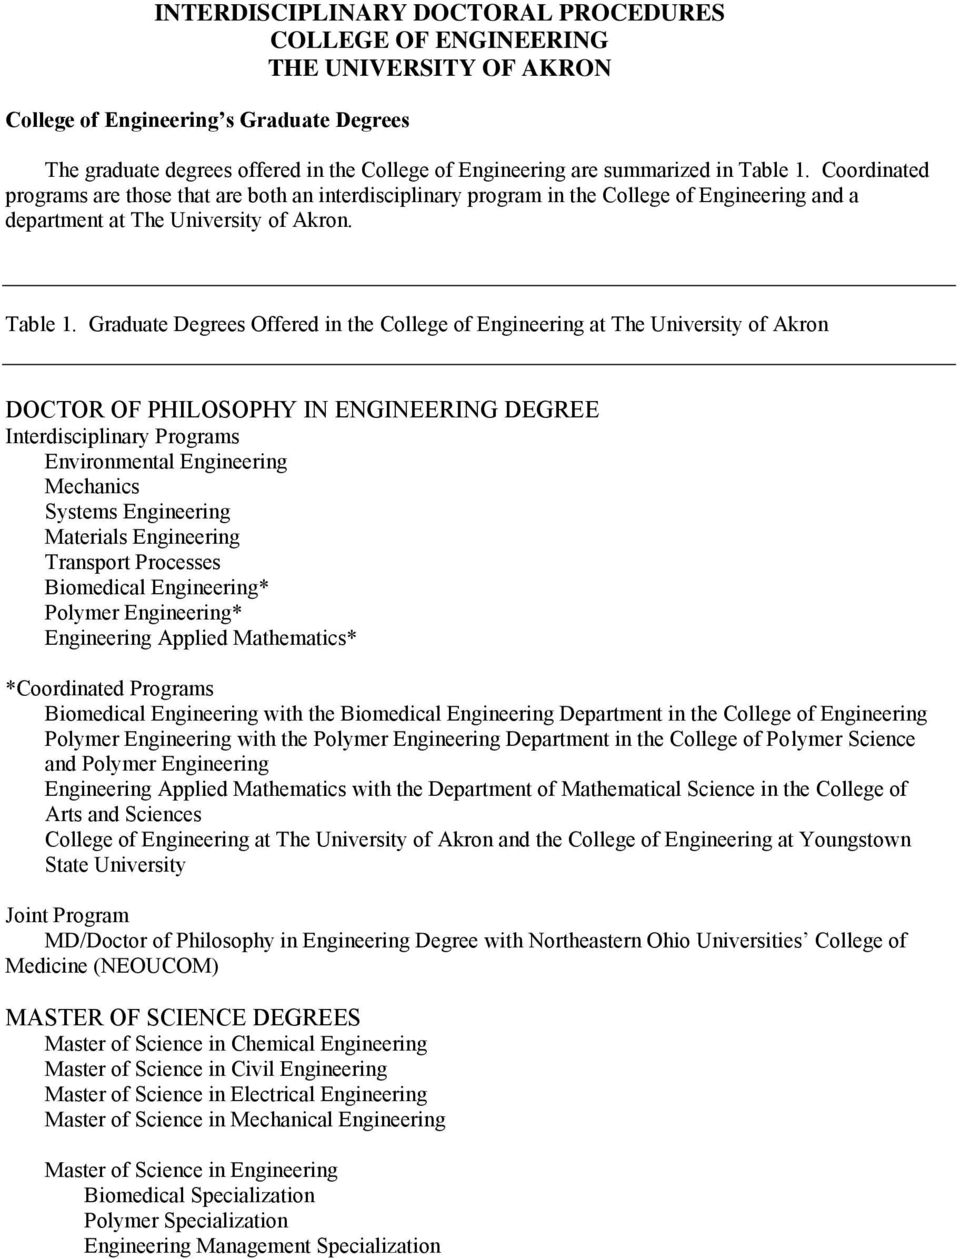 Coordinated programs are those that are both an interdisciplinary program in the College of Engineering and a department at The University of Akron. Table 1.